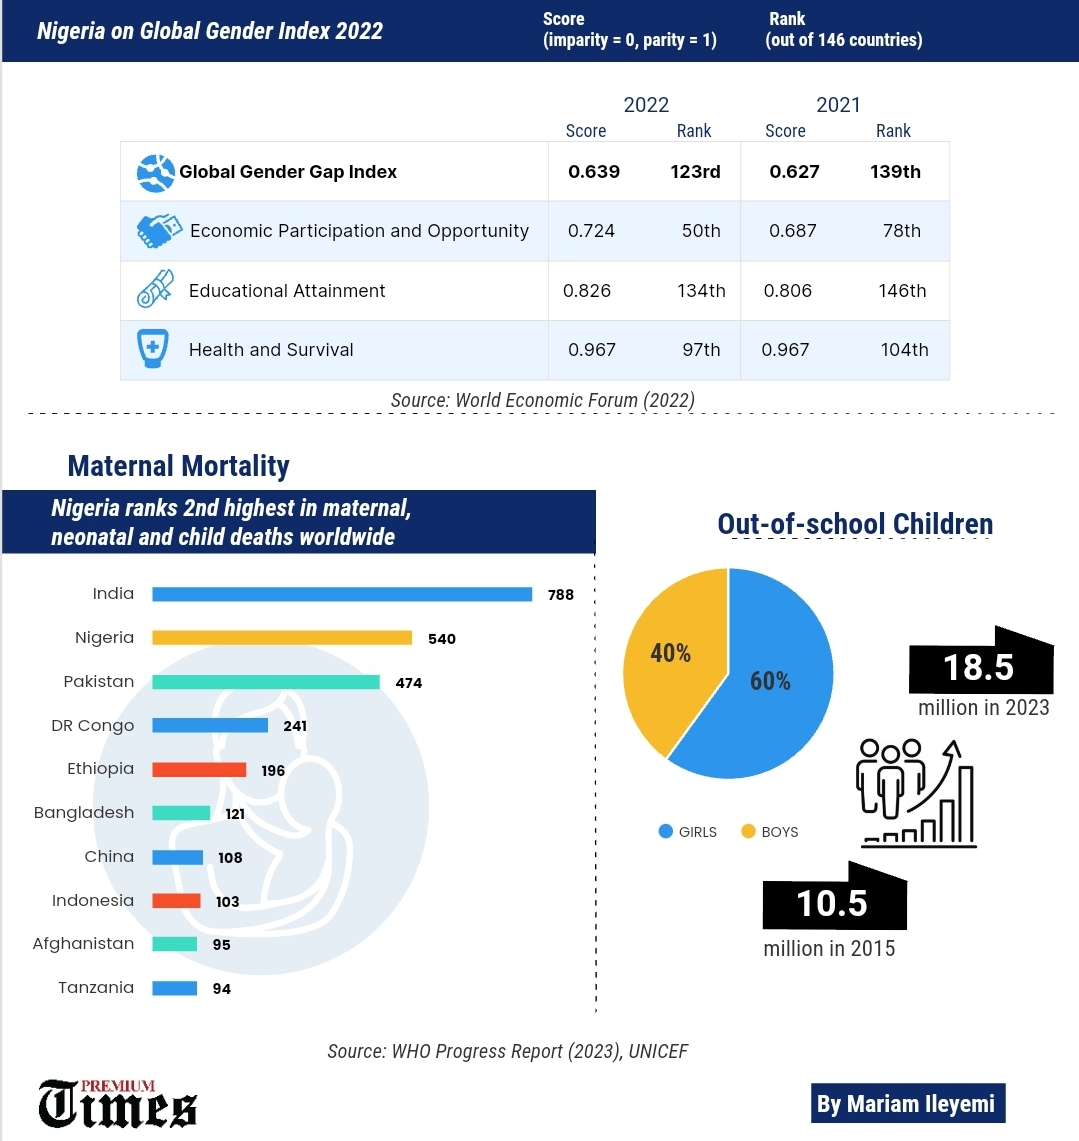 Infographics on global gender index, maternal mortality and out-of-school girls